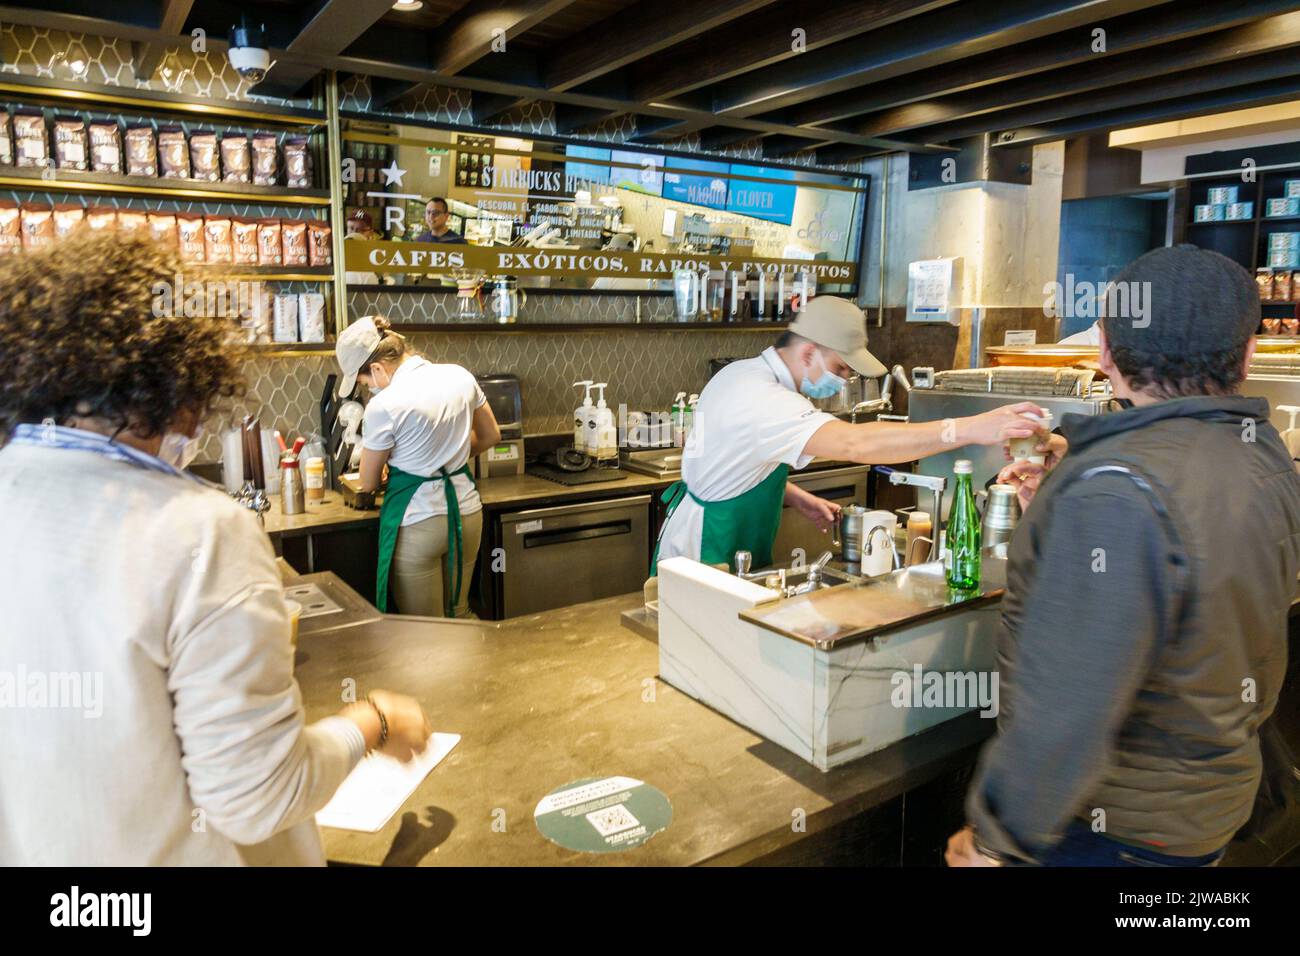 Bogota Colombia,El Chico Carrera 13 Starbucks Coffee Parque 93,restaurant restaurants dine dining eating out casual cafe cafes bistro bistros food,Col Stock Photo